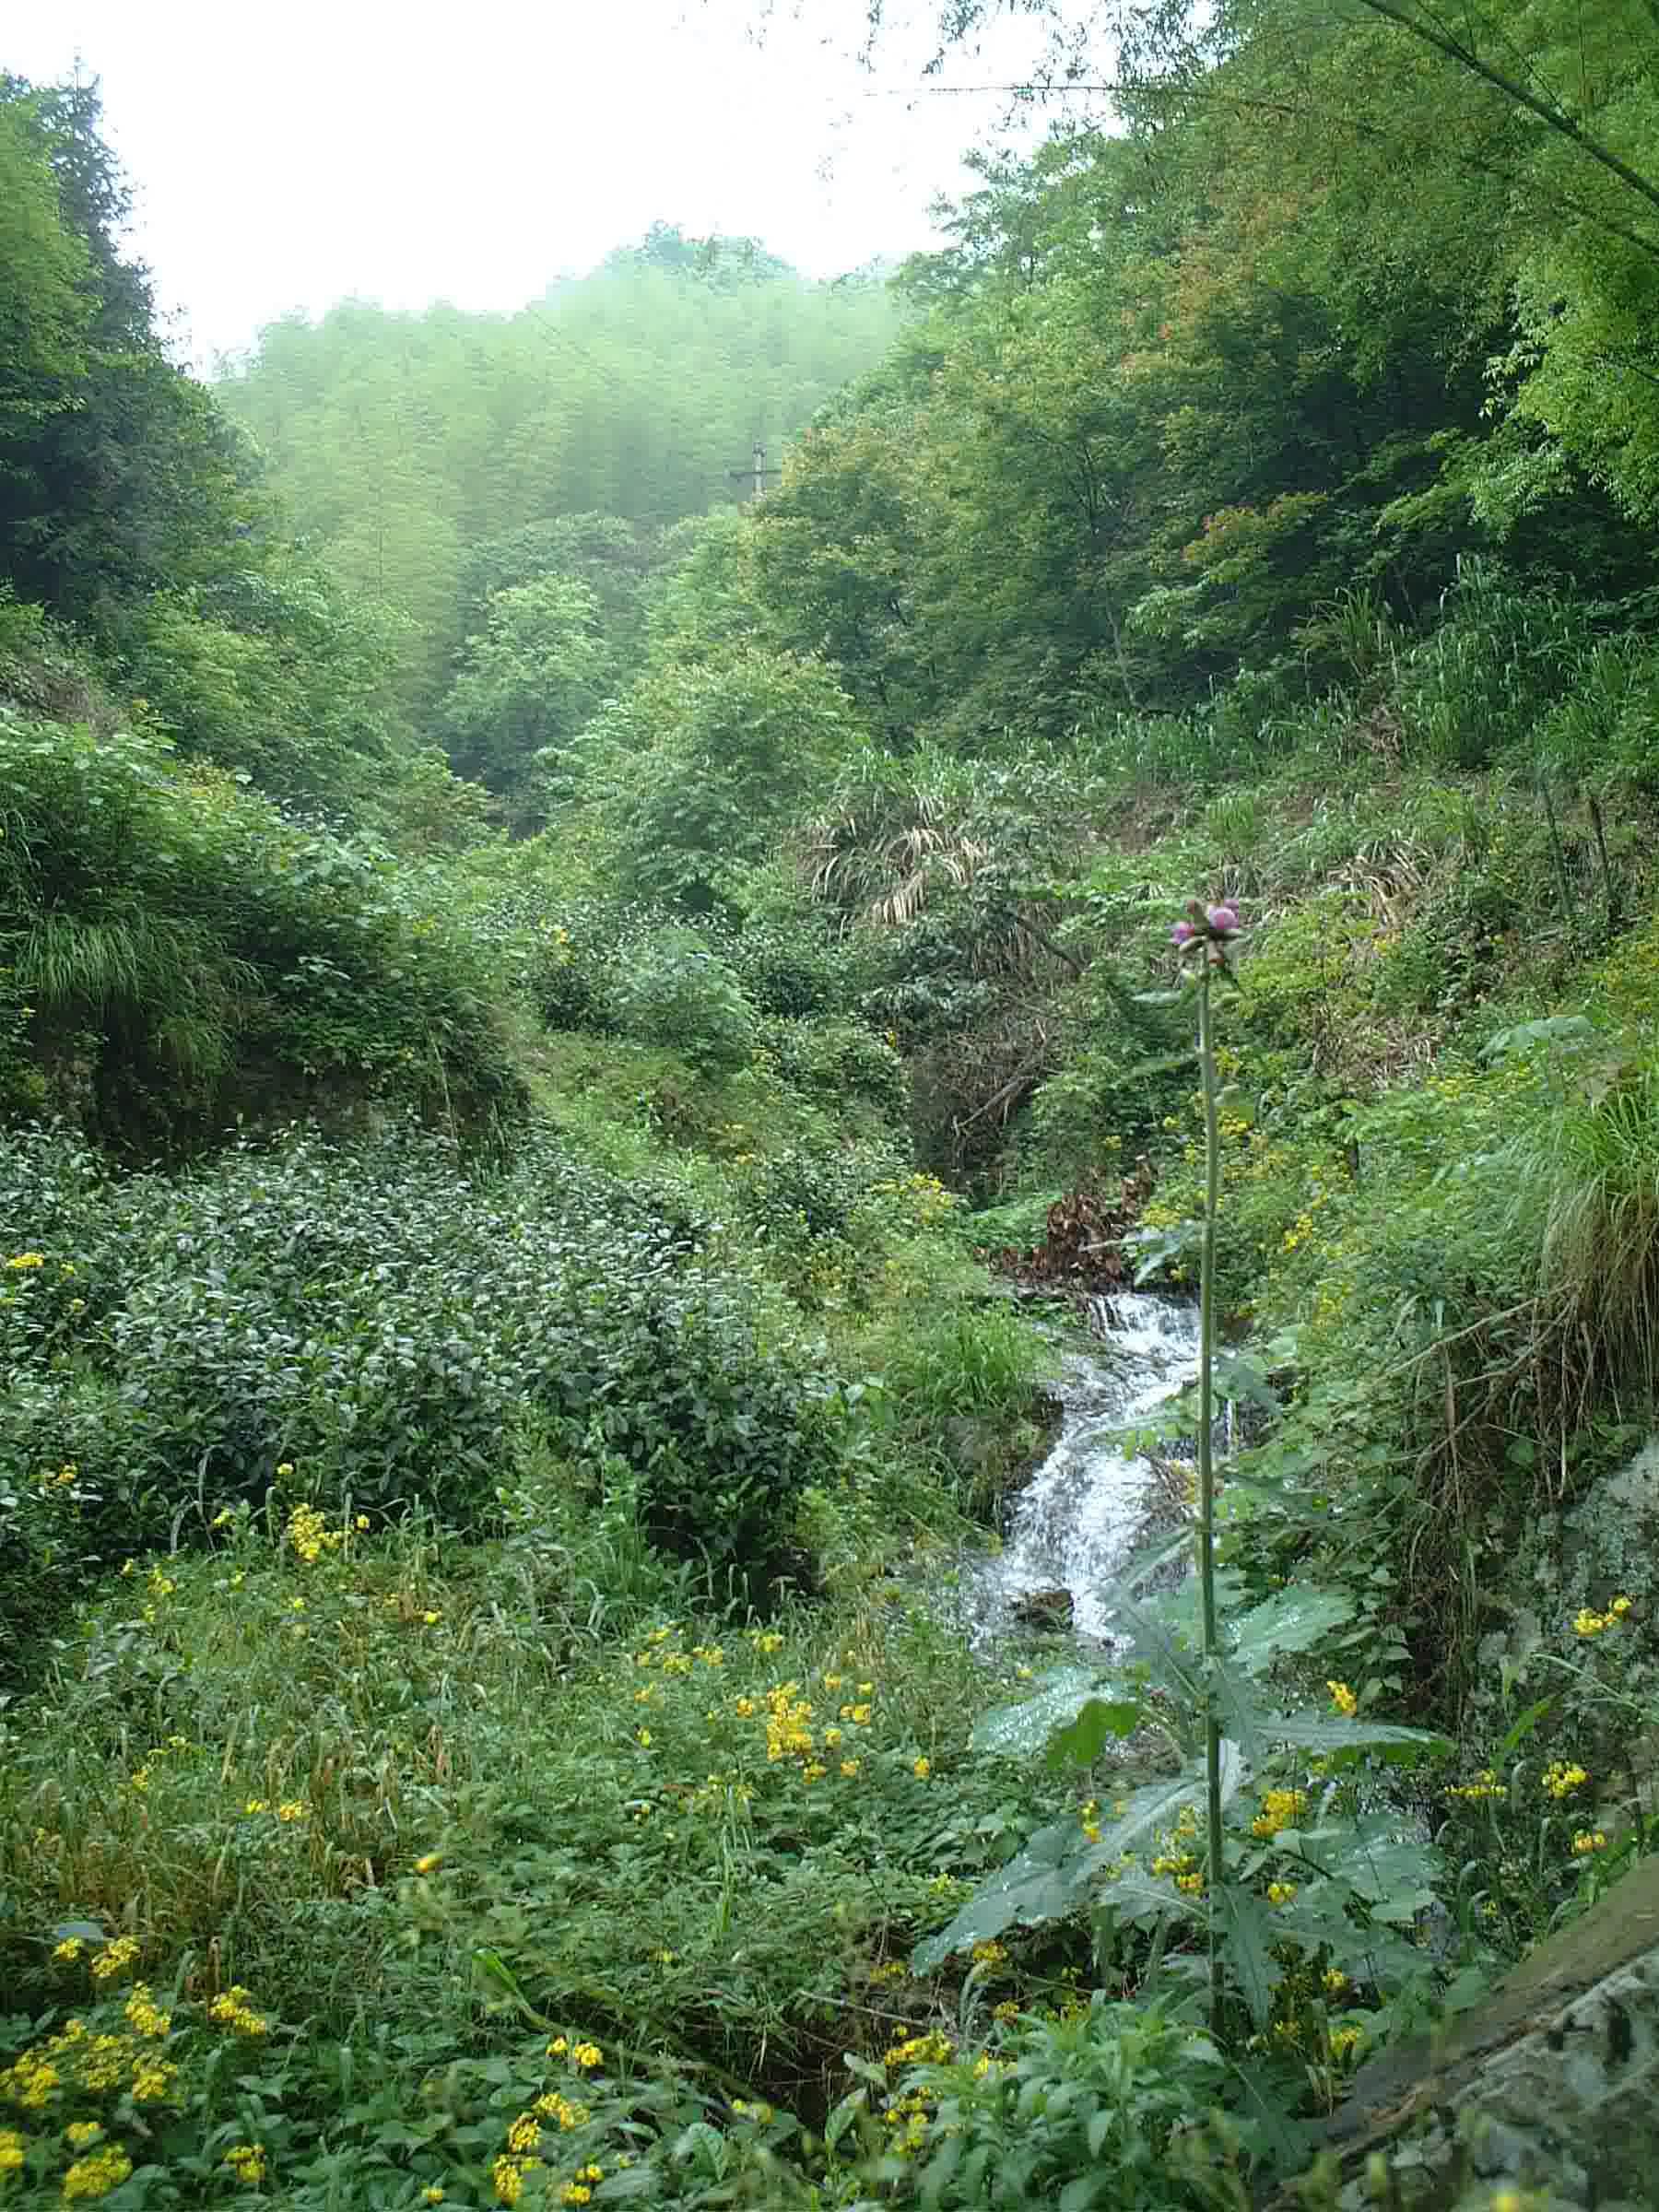 A small stream running through a lush green mountain valley full of tea bushes, trees, and wildflowers.